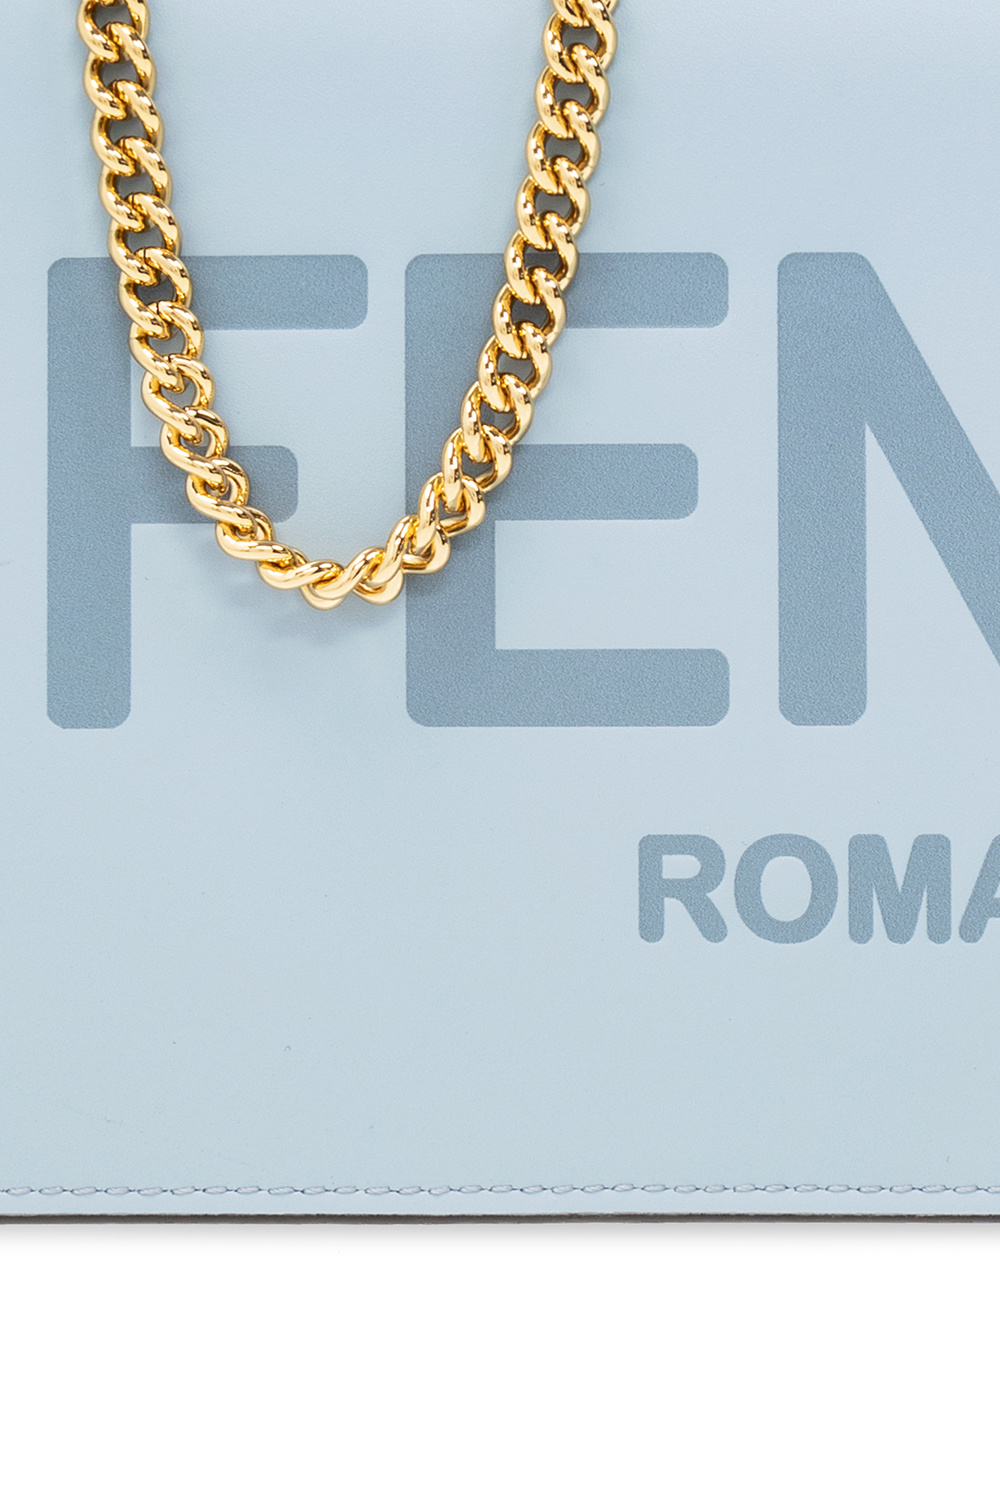 Fendi Wallet with chain